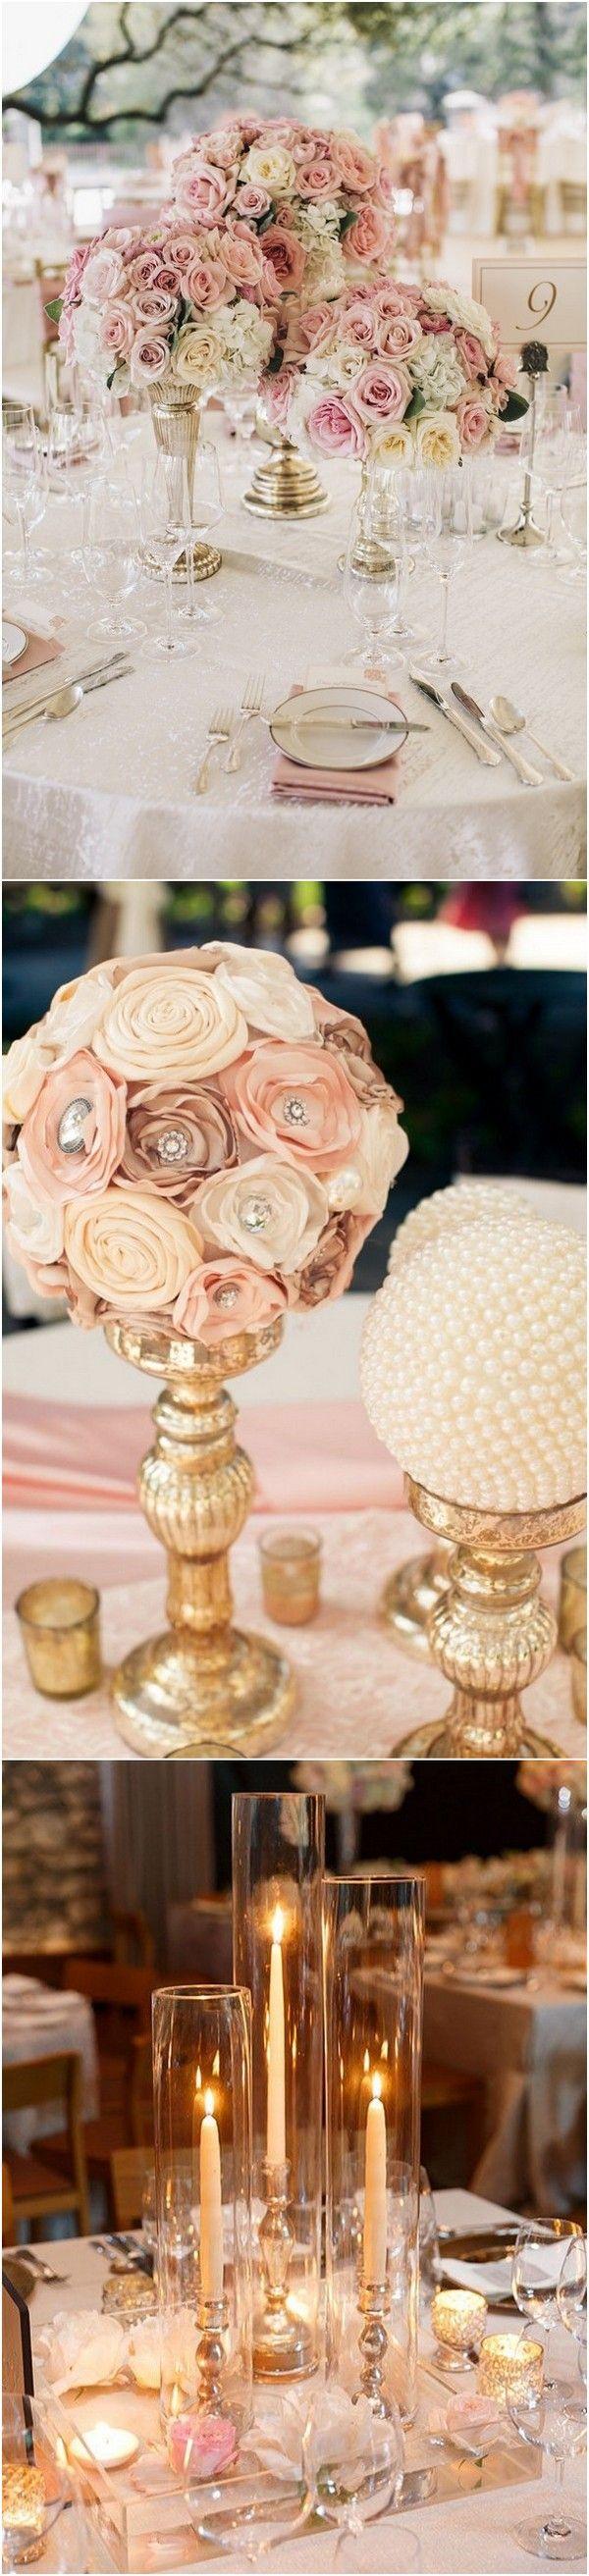 Свадьба - Trending-18 Outstanding Wedding Centerpieces With Candlesticks - Page 3 Of 3